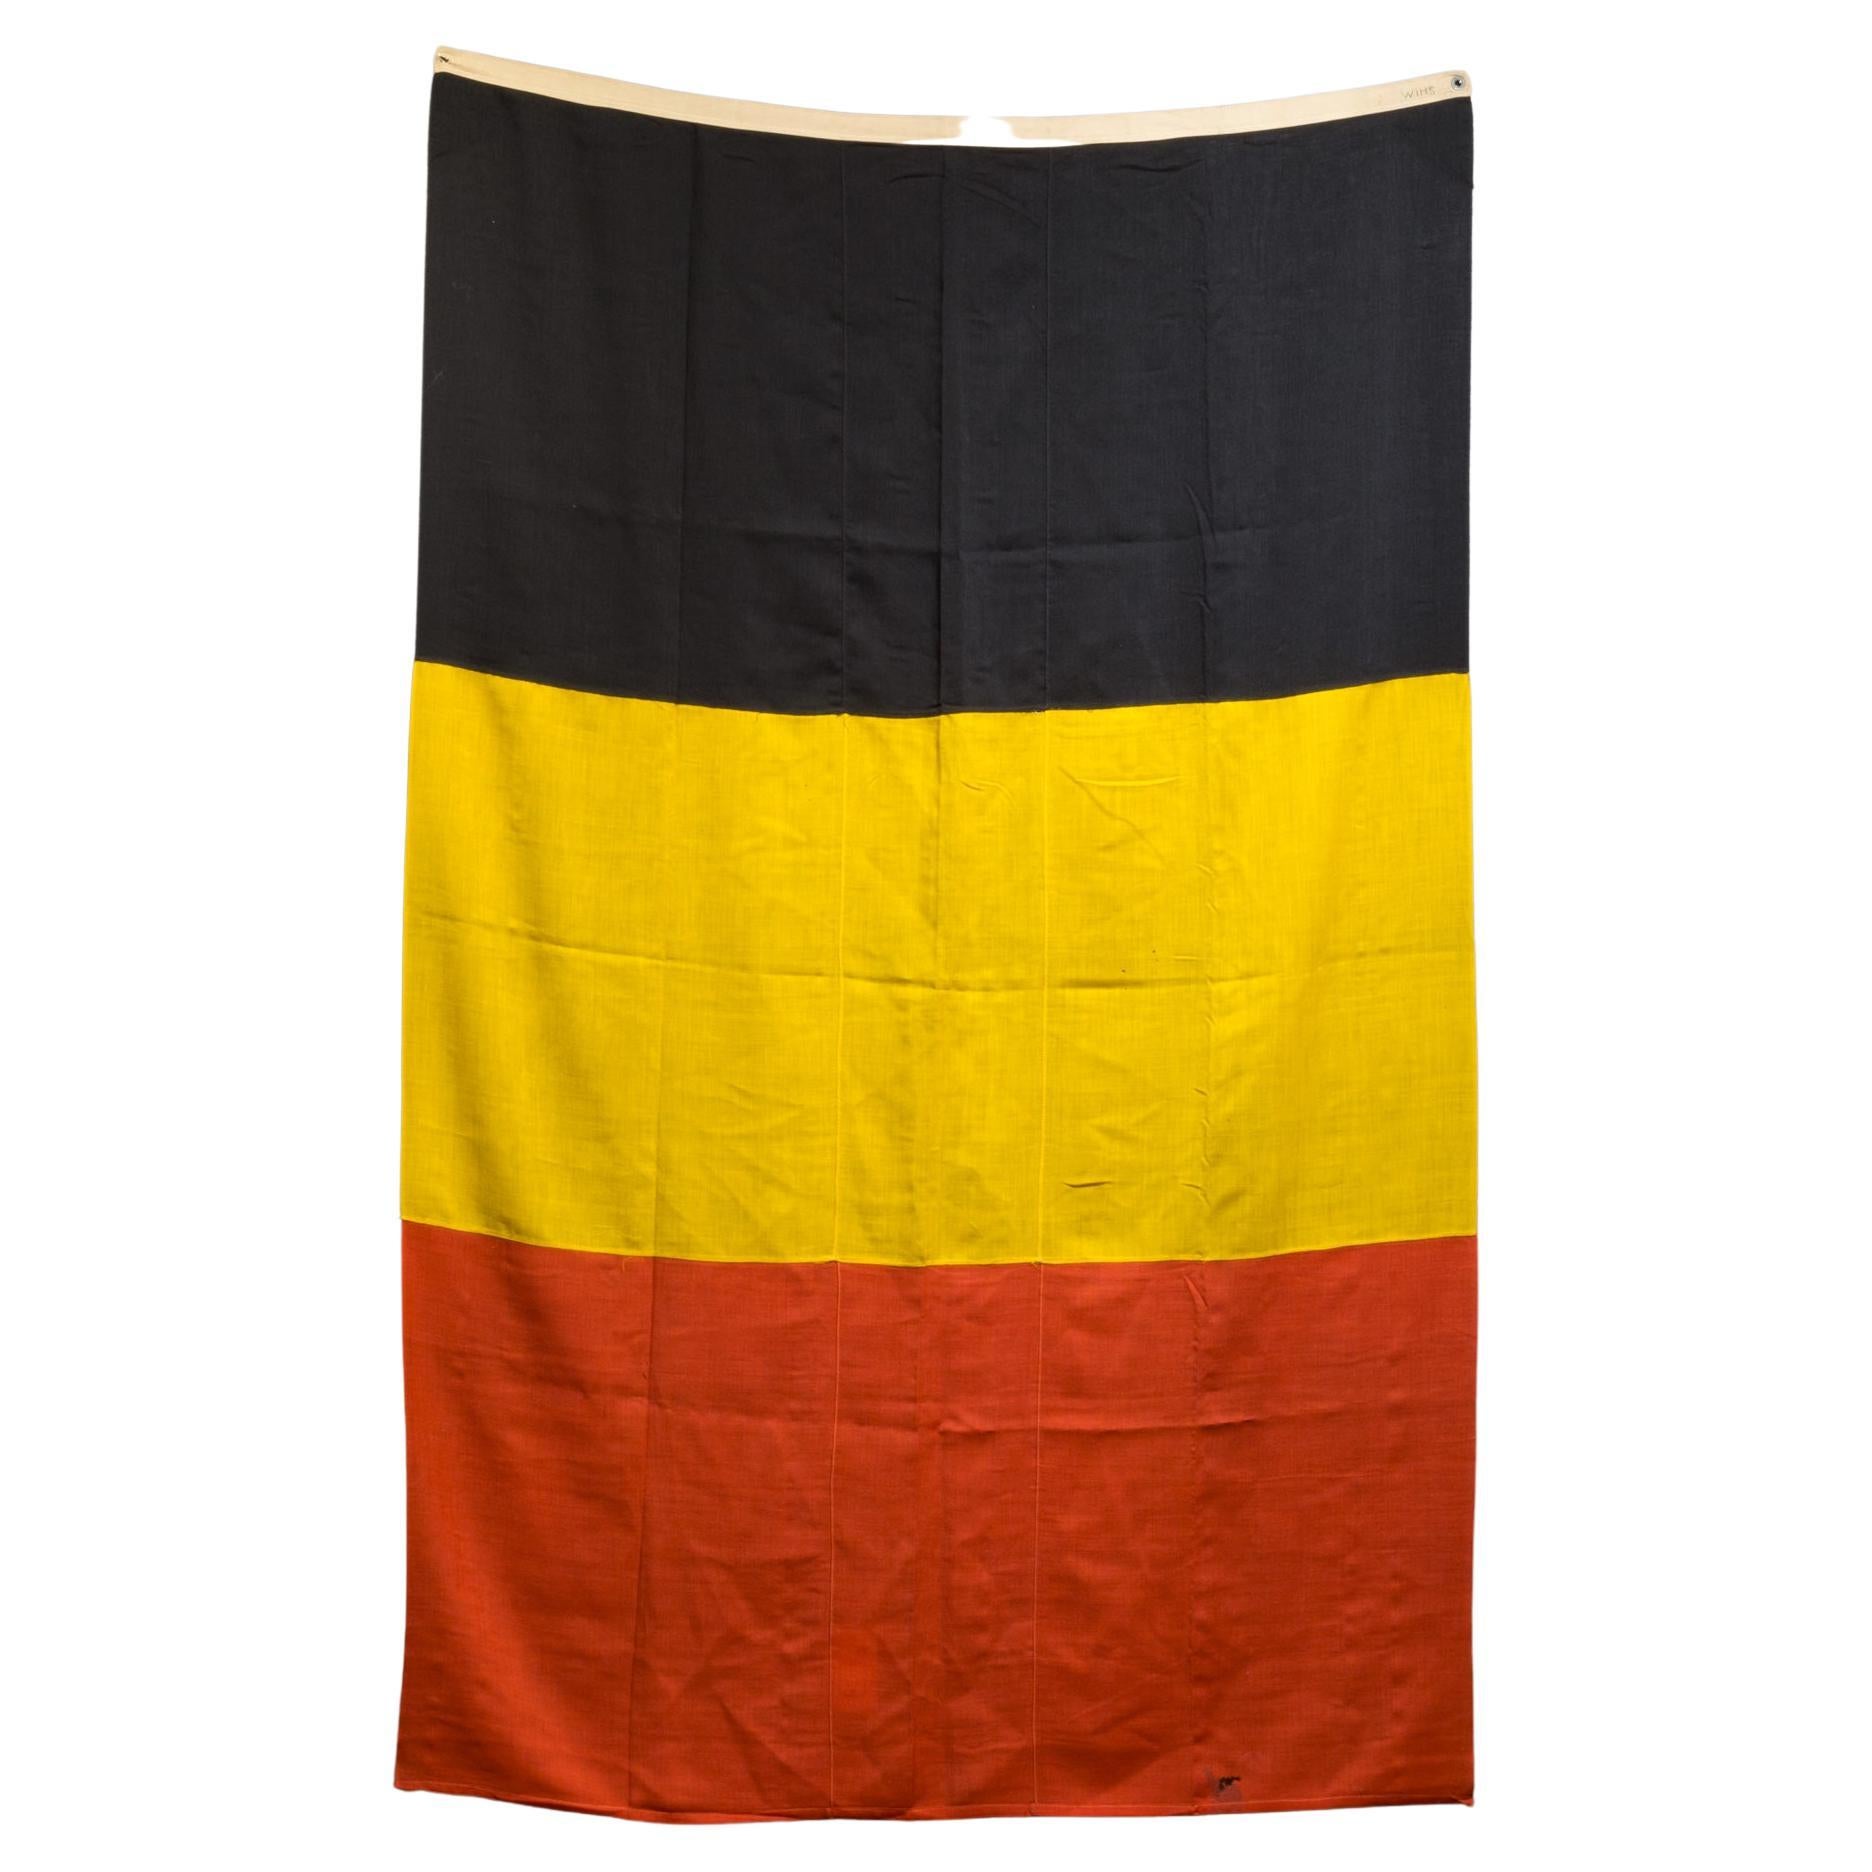 ABOUT

An original monumental Belgian flag.

    CREATOR Unknown.
    DATE OF MANUFACTURE c.1940-1950.
    MATERIALS AND TECHNIQUES Wool, Metal.
    CONDITION Good. Wear consistent with age and use. One grommet is missing.
    DIMENSIONS H 8 ft. W 5